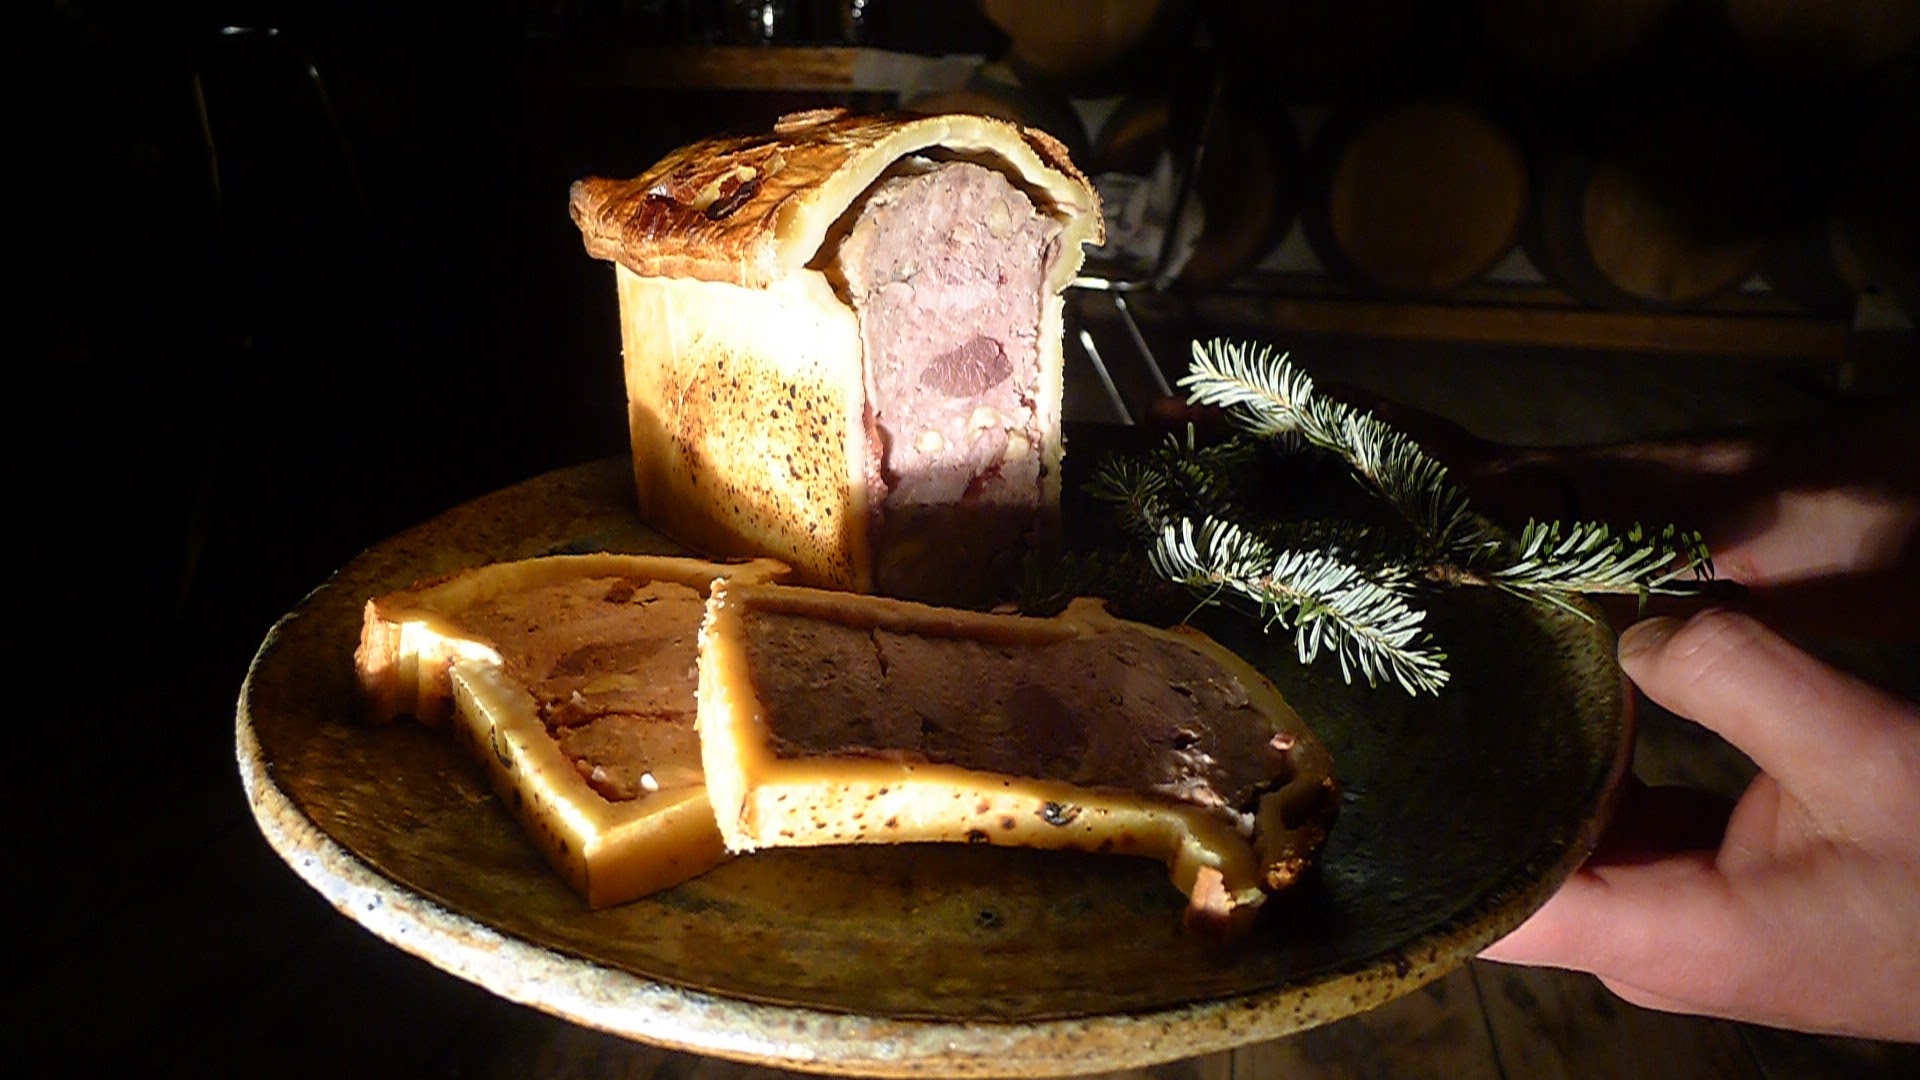 Game Paté-En-Croute, stuffed with pheasant, duck, goose, rabbit, and venison. Served with cressy mustard and cornichon. Mind-blowing, and served with some vintage Hinterland Rosé.